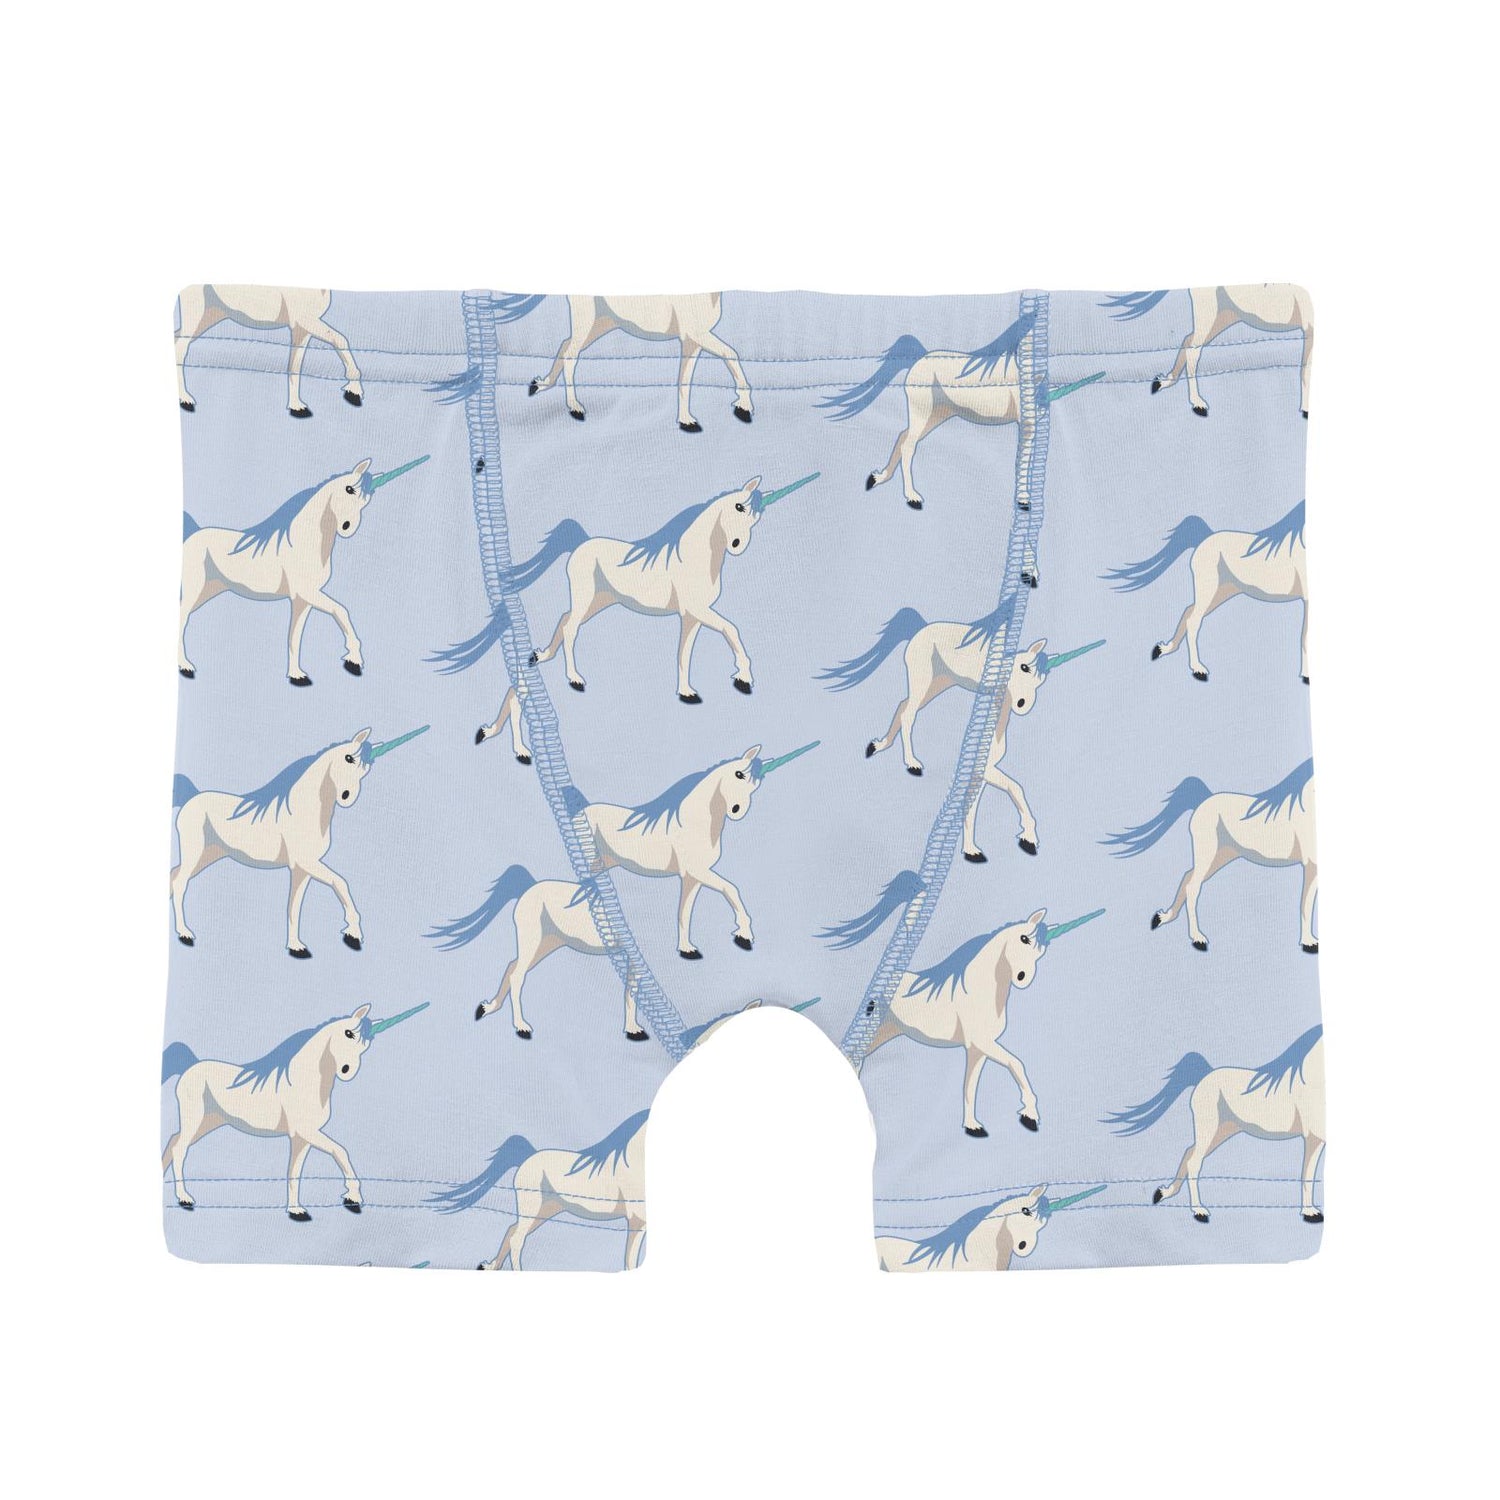 Print Boxer Brief Set of 3 in Dew Prancing Unicorn, Deep Space & Dream Blue Four Dragons